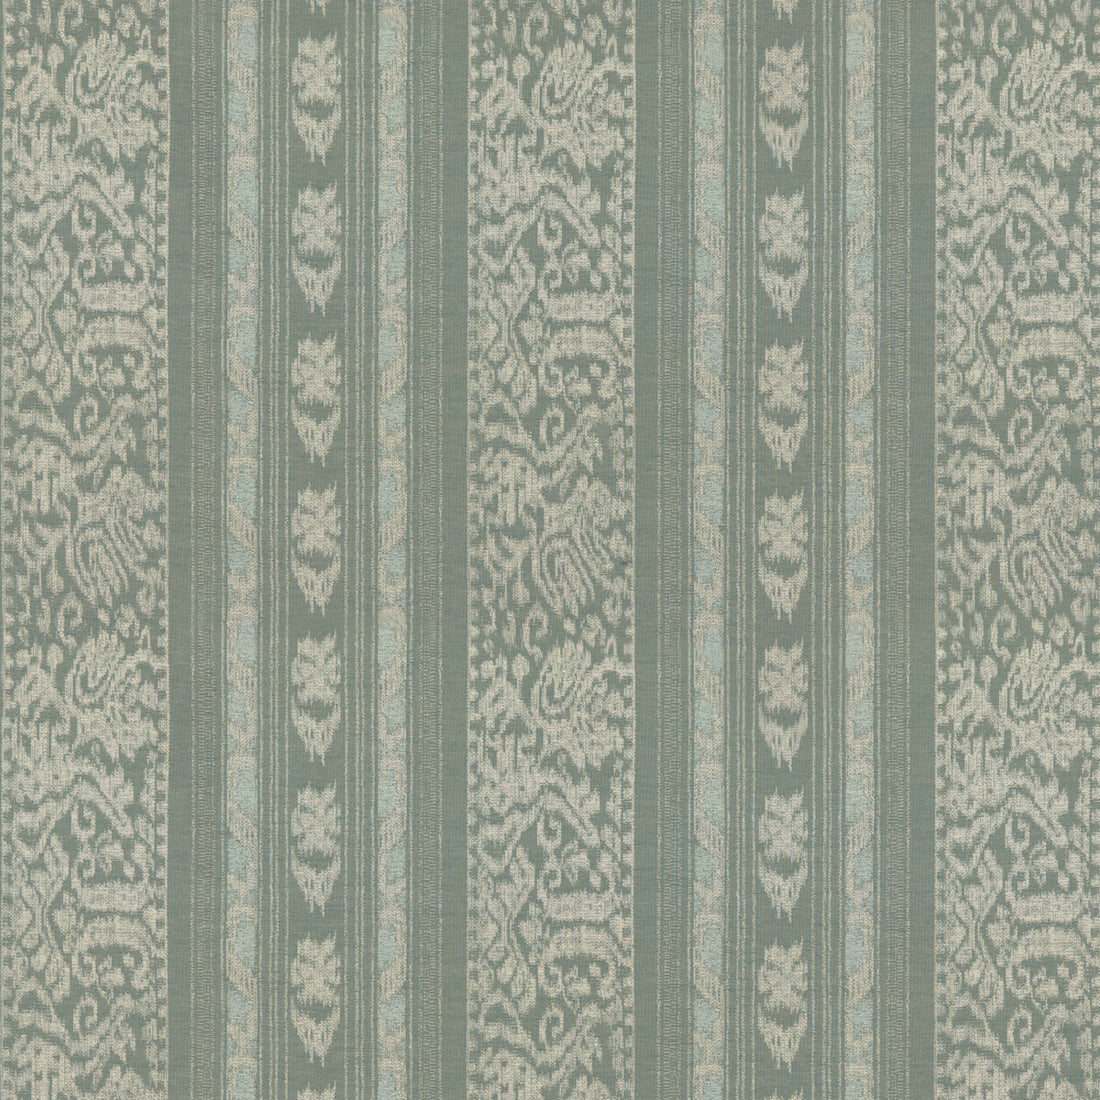 Senara fabric in aqua color - pattern BF10882.3.0 - by G P &amp; J Baker in the Chifu collection